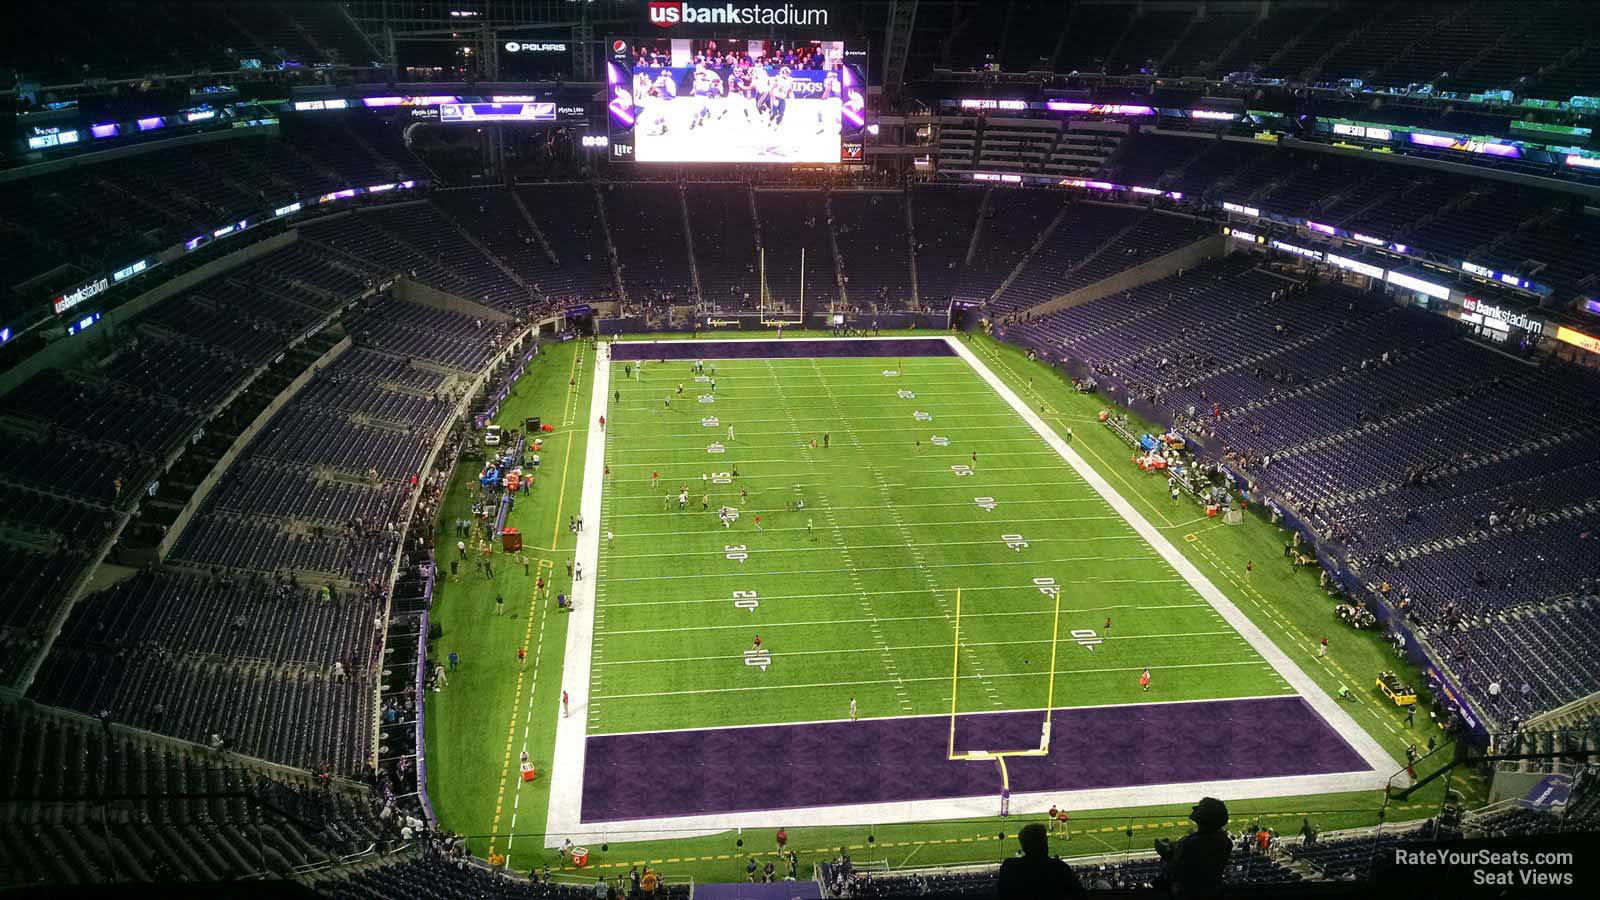 section 328, row 11 seat view  for football - u.s. bank stadium